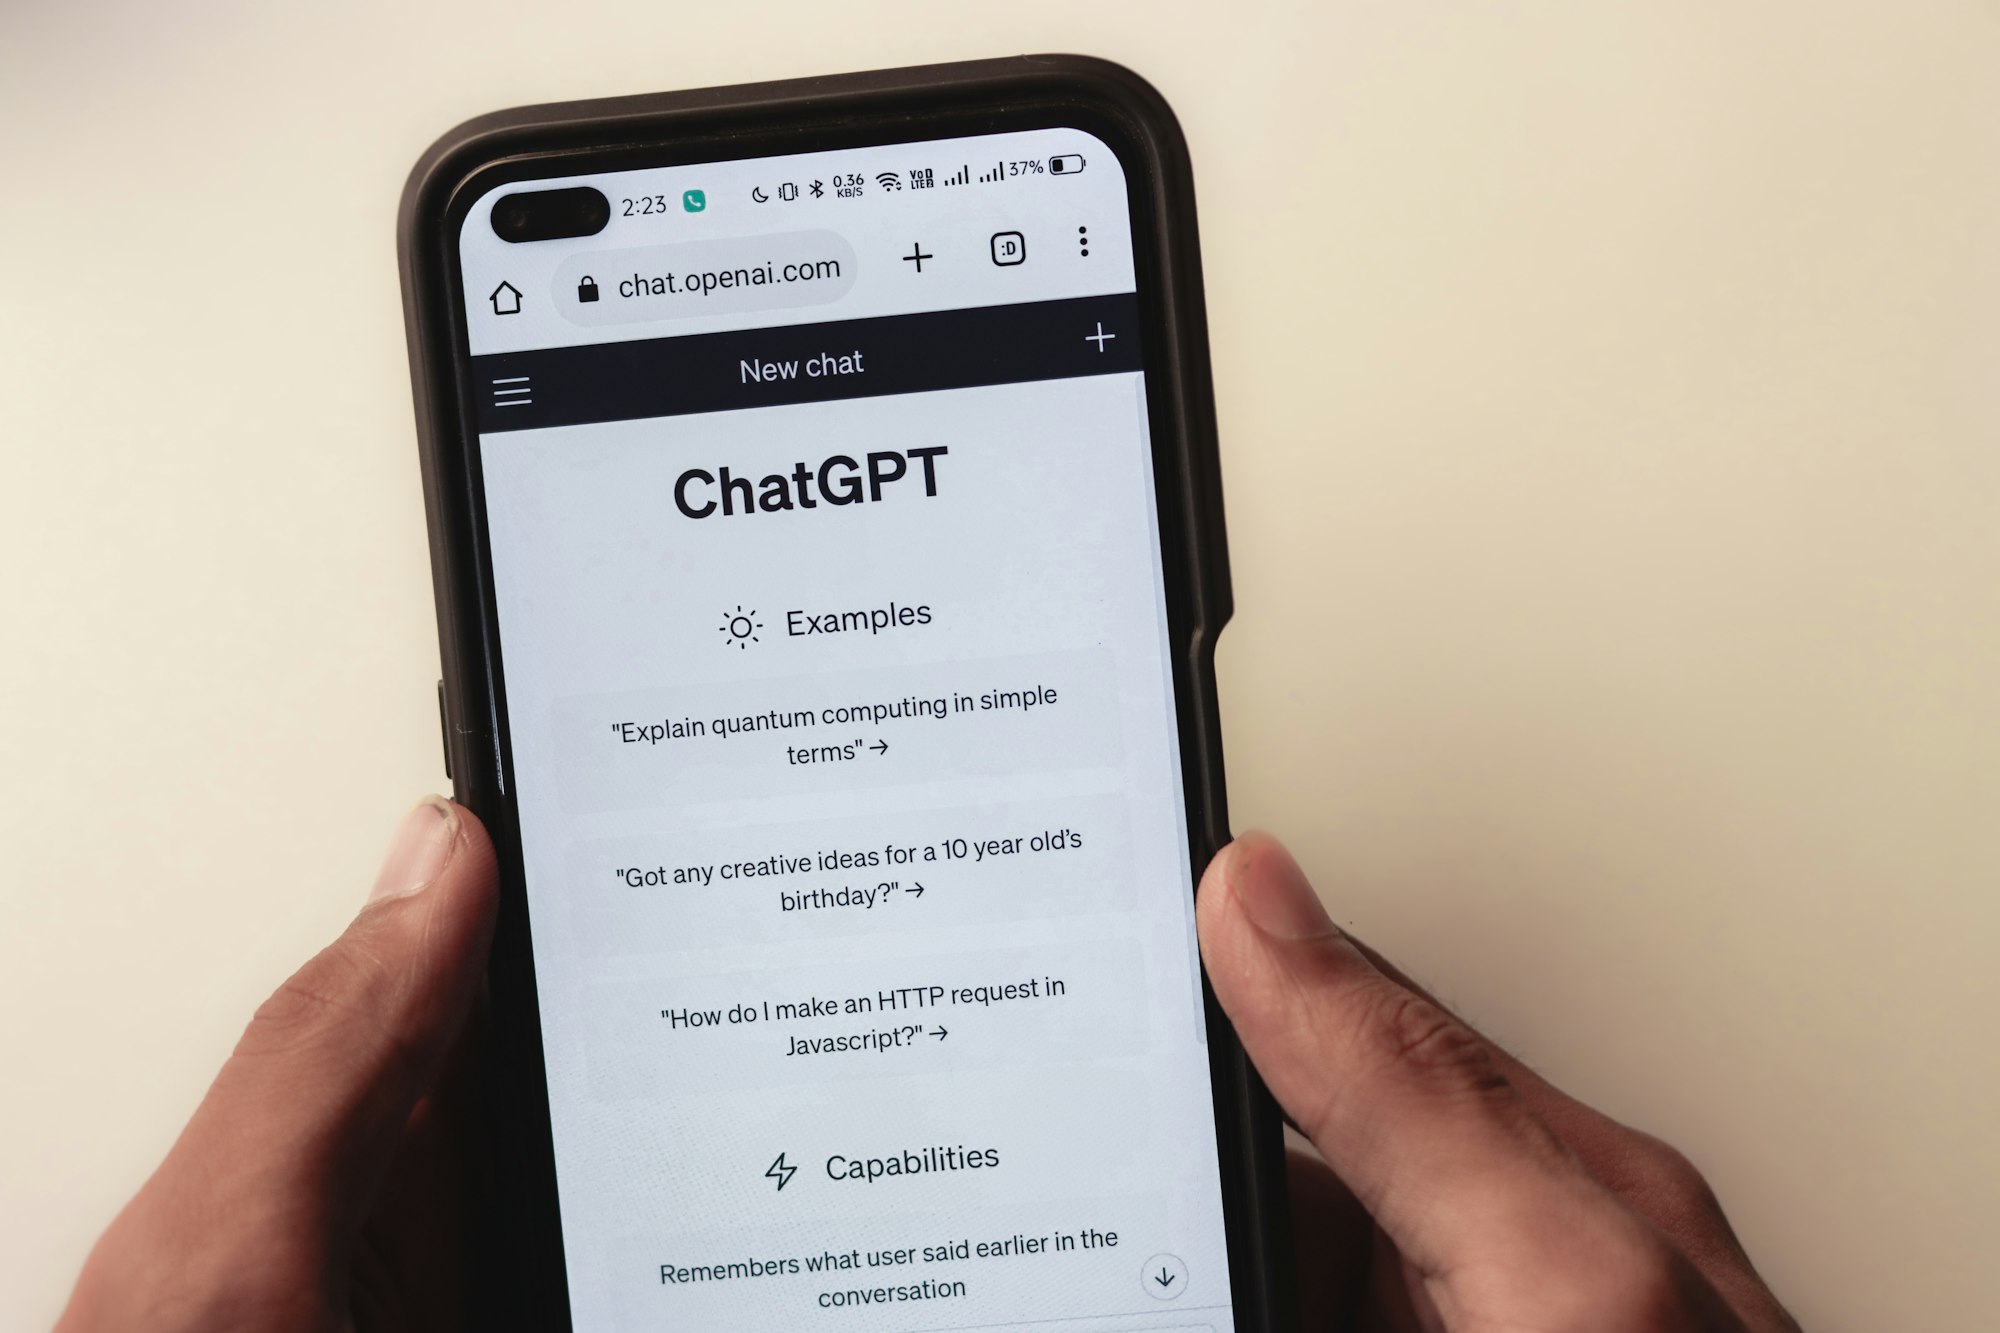 How to Save, Export, and Share Your ChatGPT Conversation